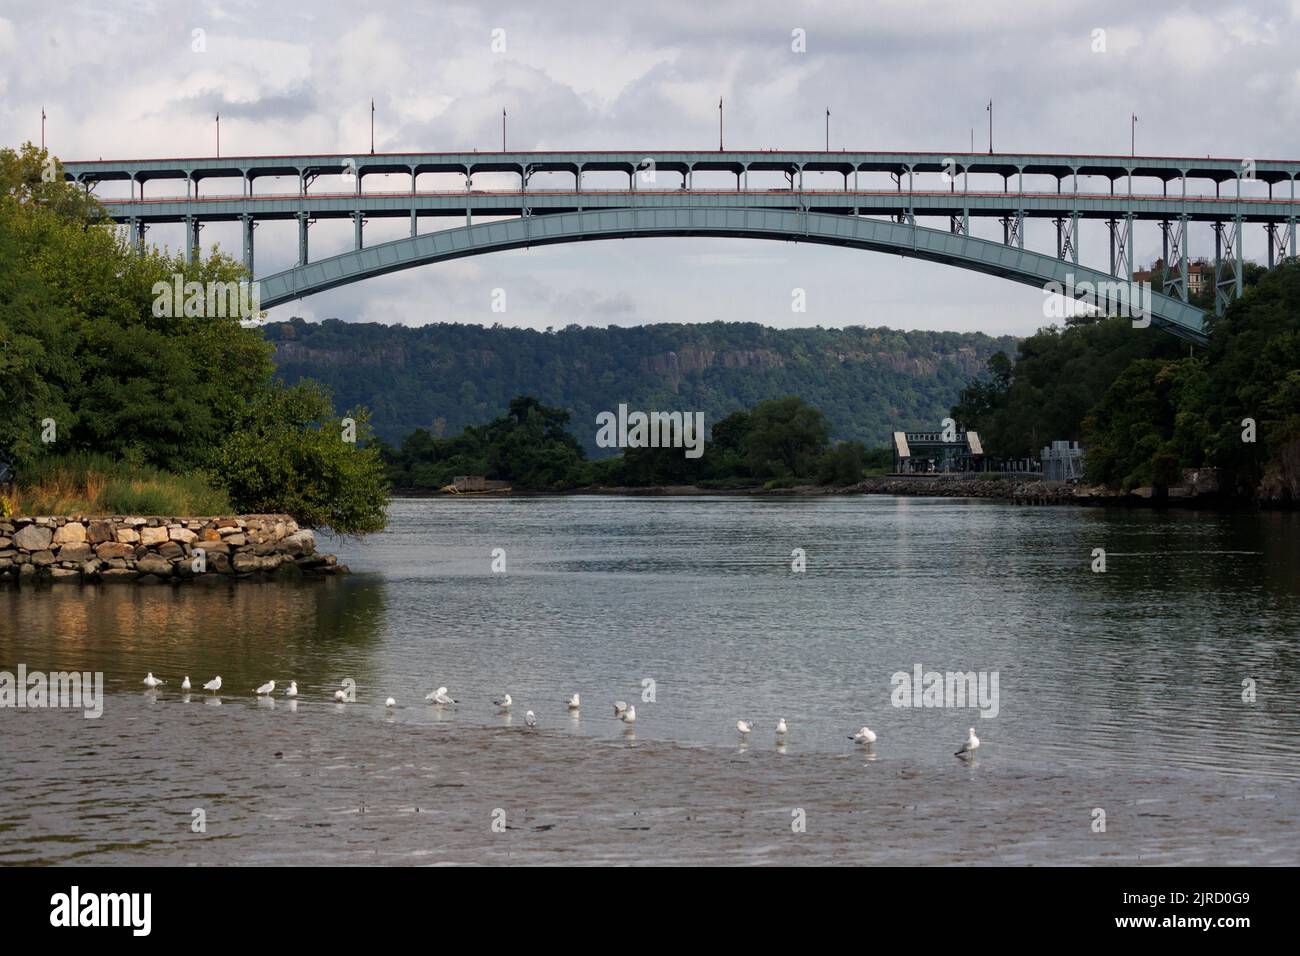 Henry Hudson Bridge over Spuyten Duyvil Creek connecting Manhattan to the Bronx on a cloudy morning, seagulls wade in a row at the edge of the water Stock Photo